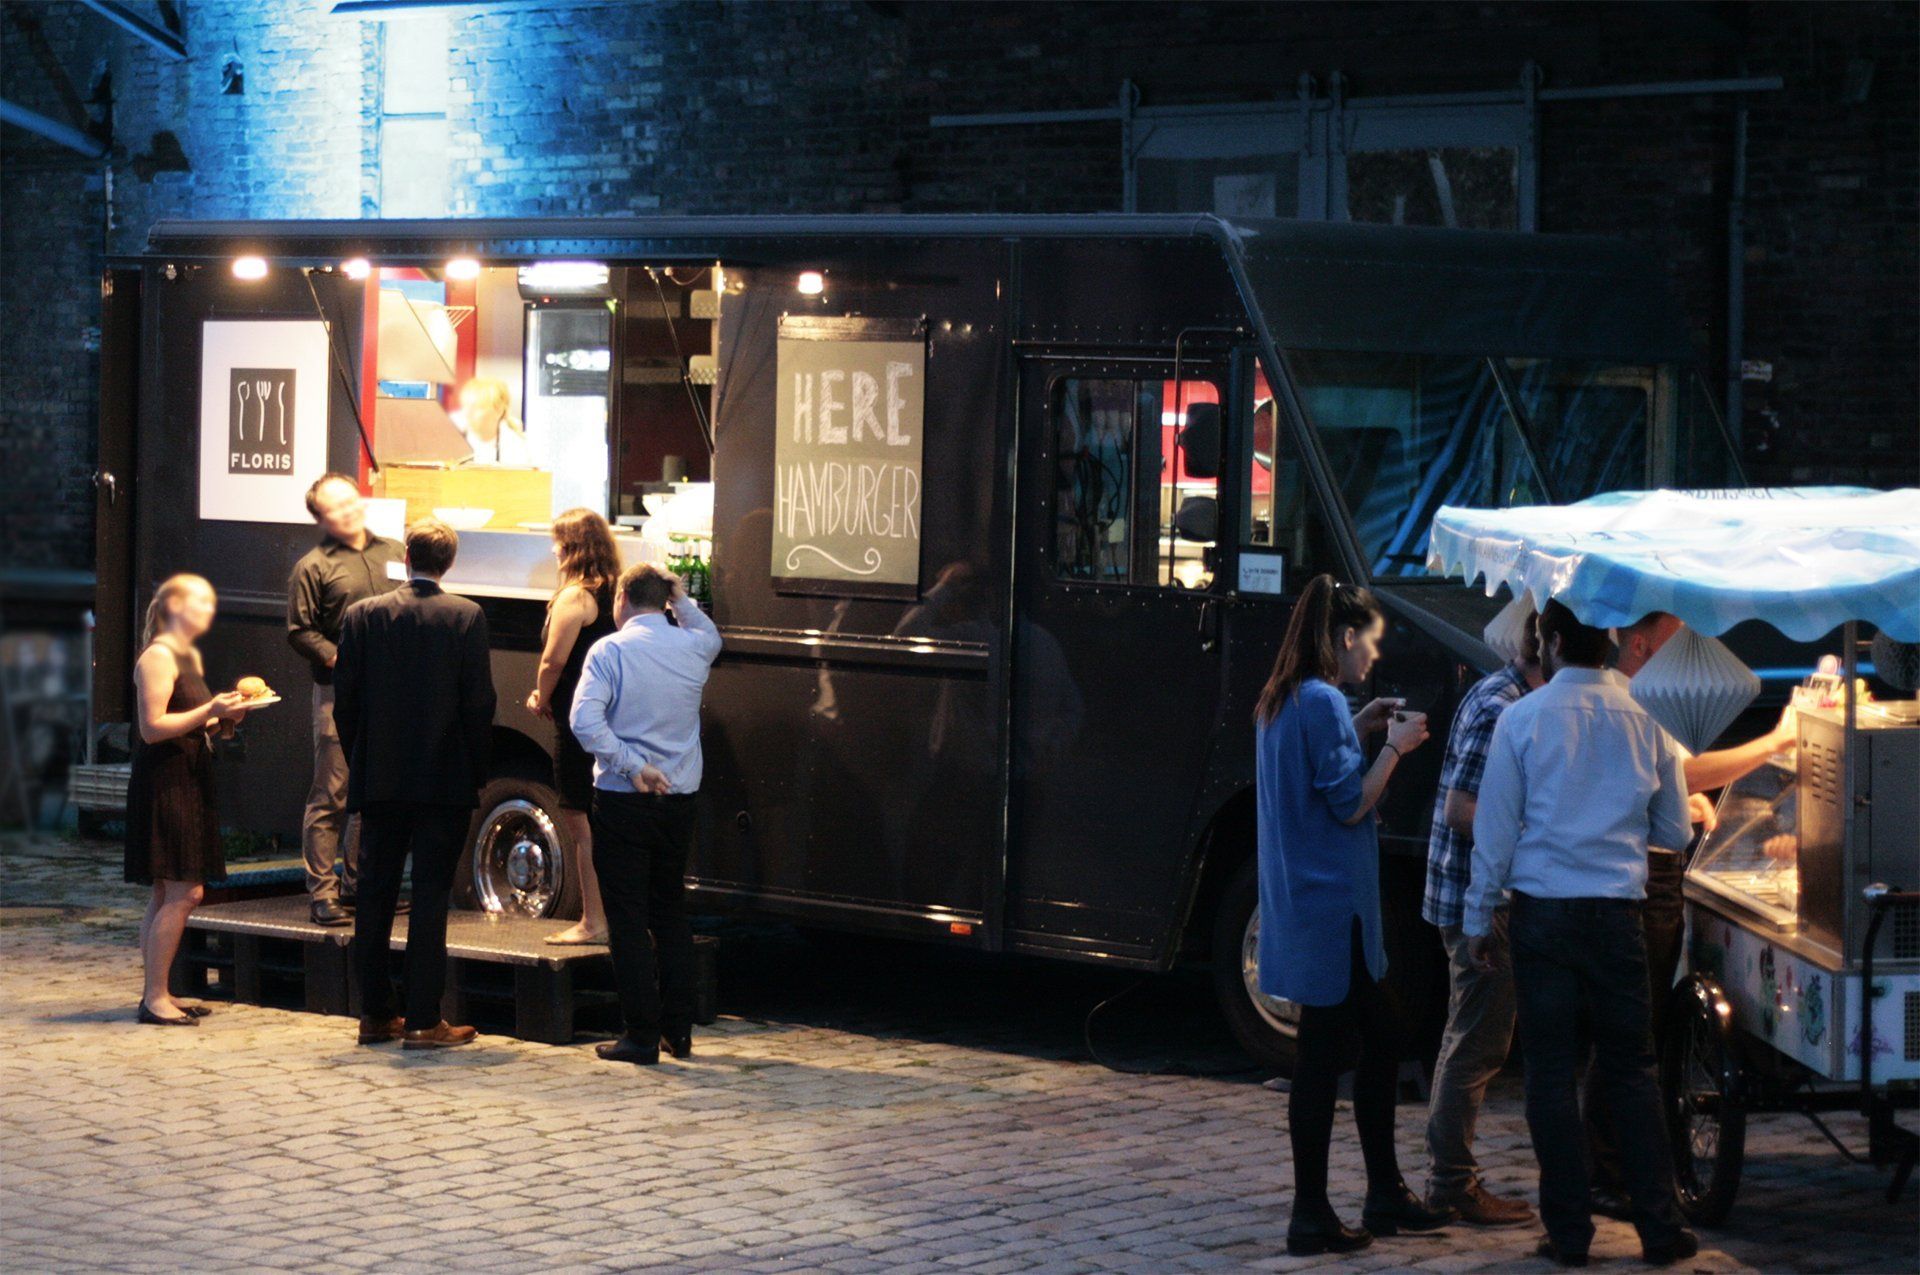 Food Truck by Floris Catering